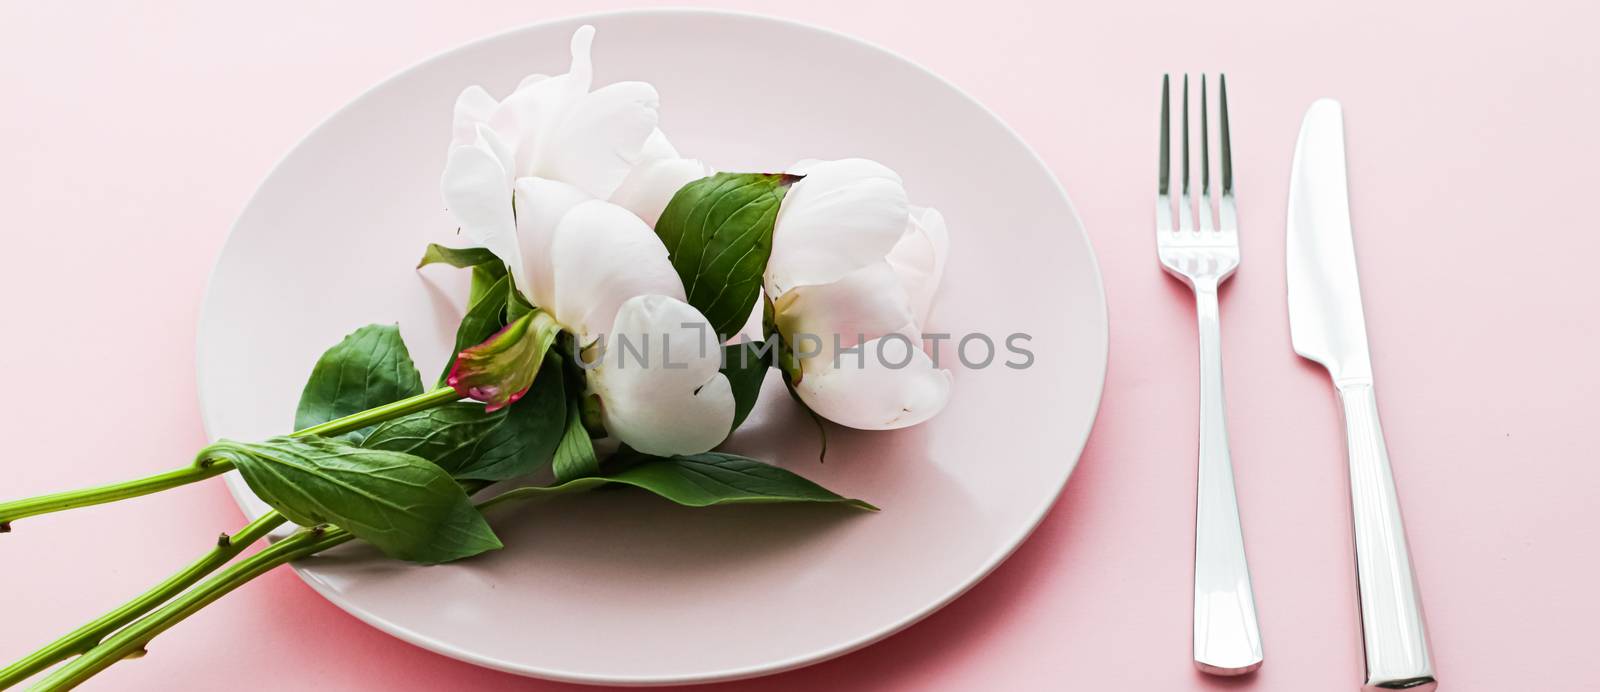 Dining plate and cutlery with peony flowers as wedding decor set on pink background, top tableware for event decoration and menu branding by Anneleven